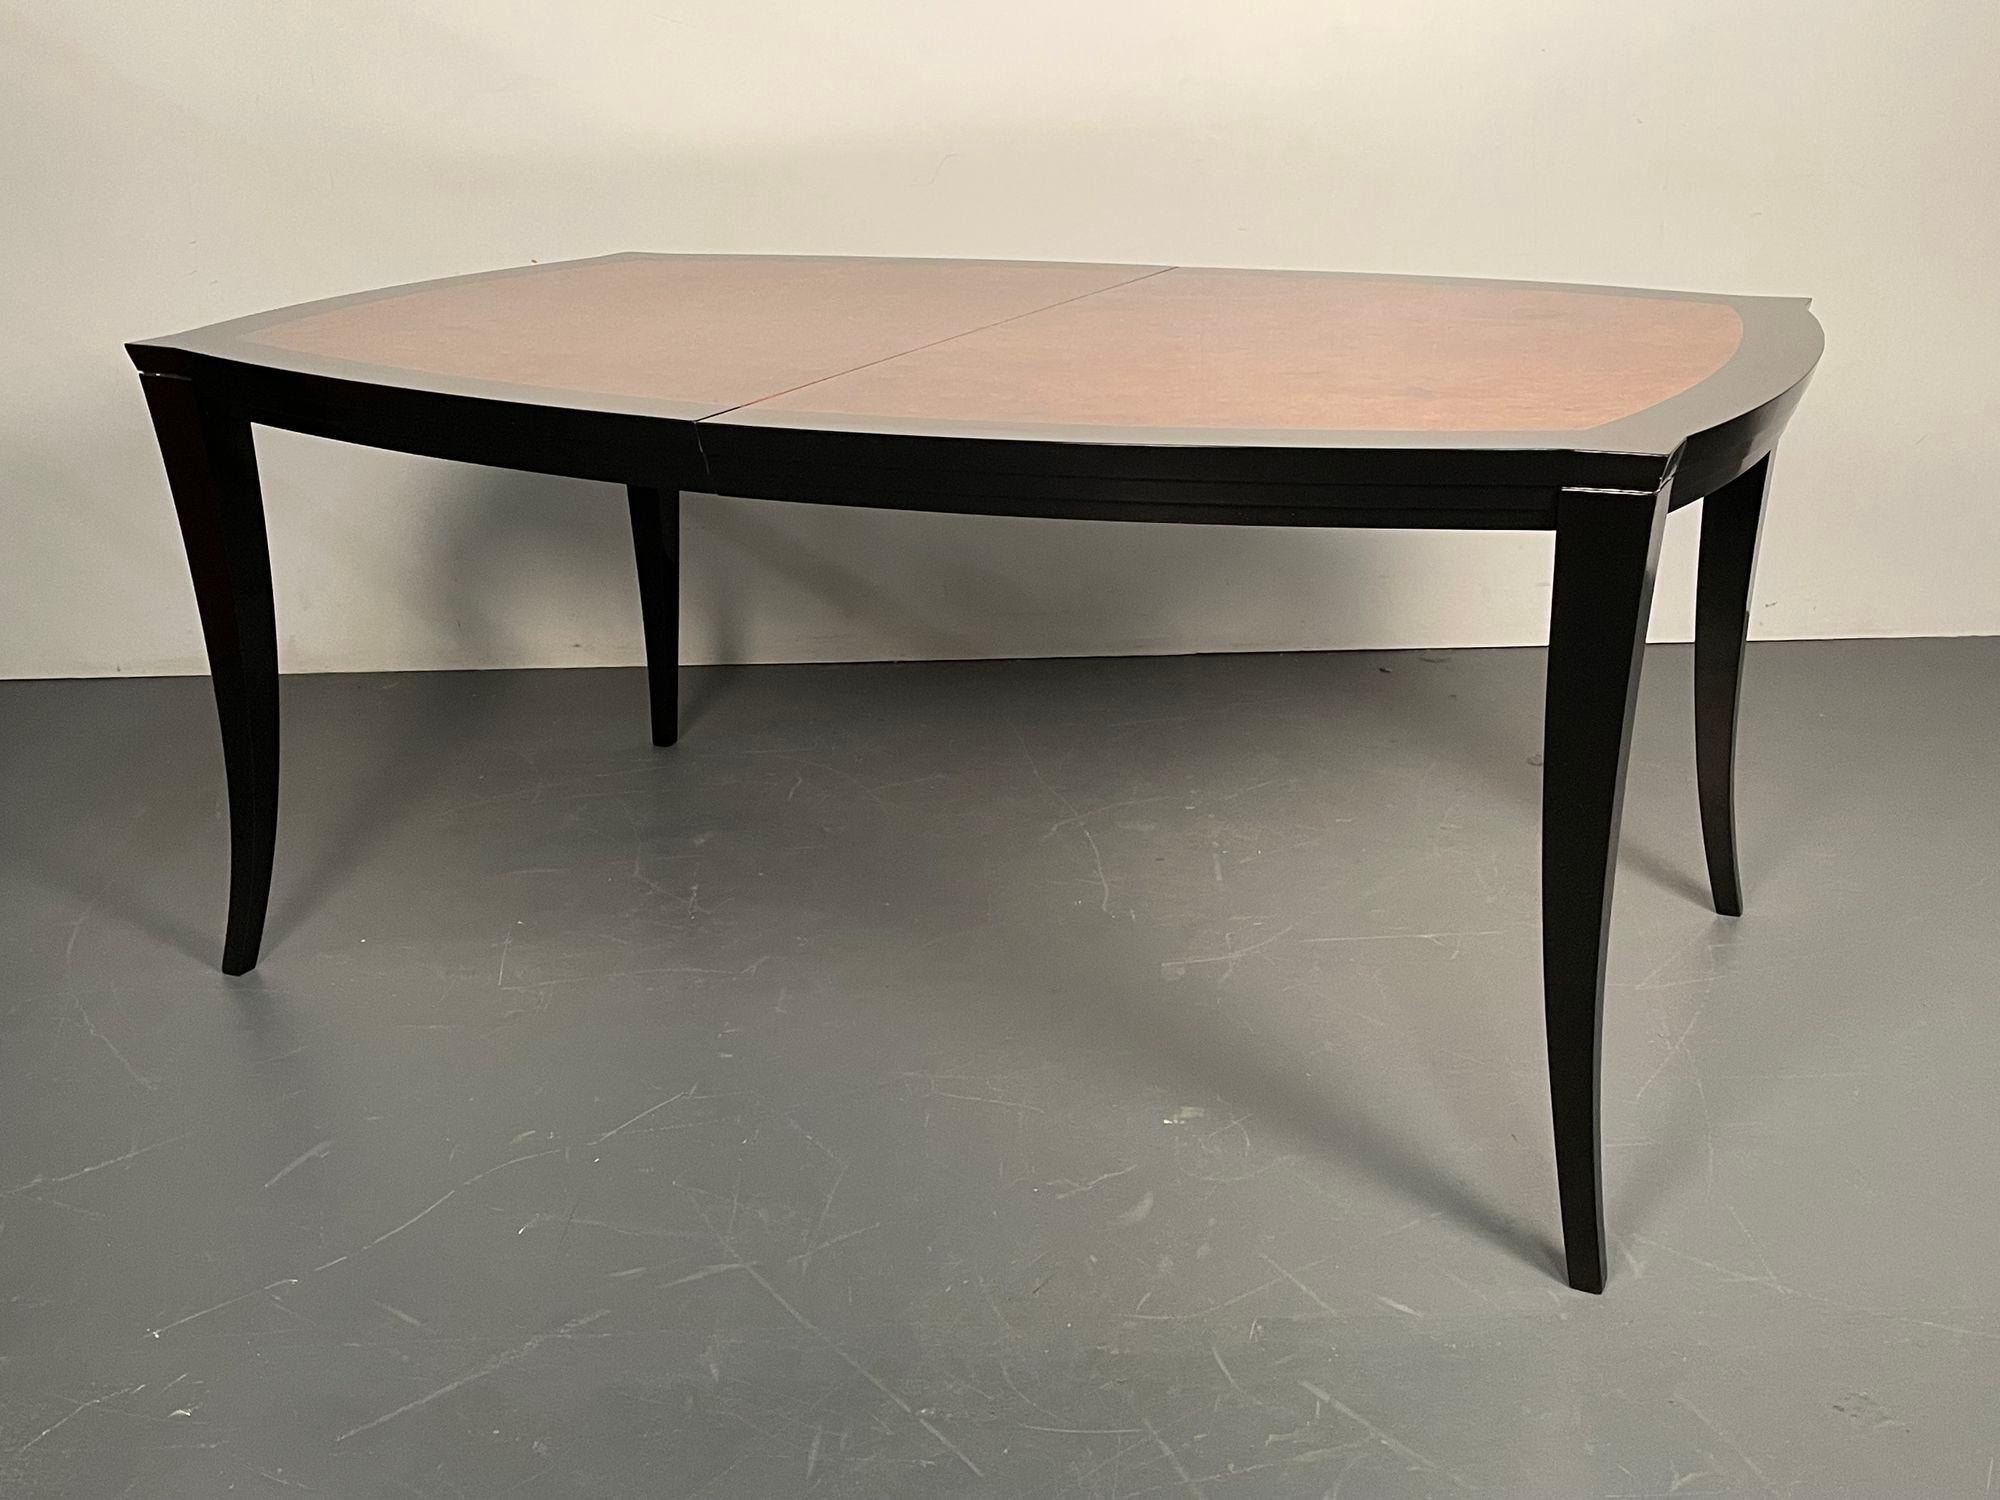 American Mid-Century Modern Eva Dining Table by Vladimir Kagan, Labeled Full Dining Set For Sale